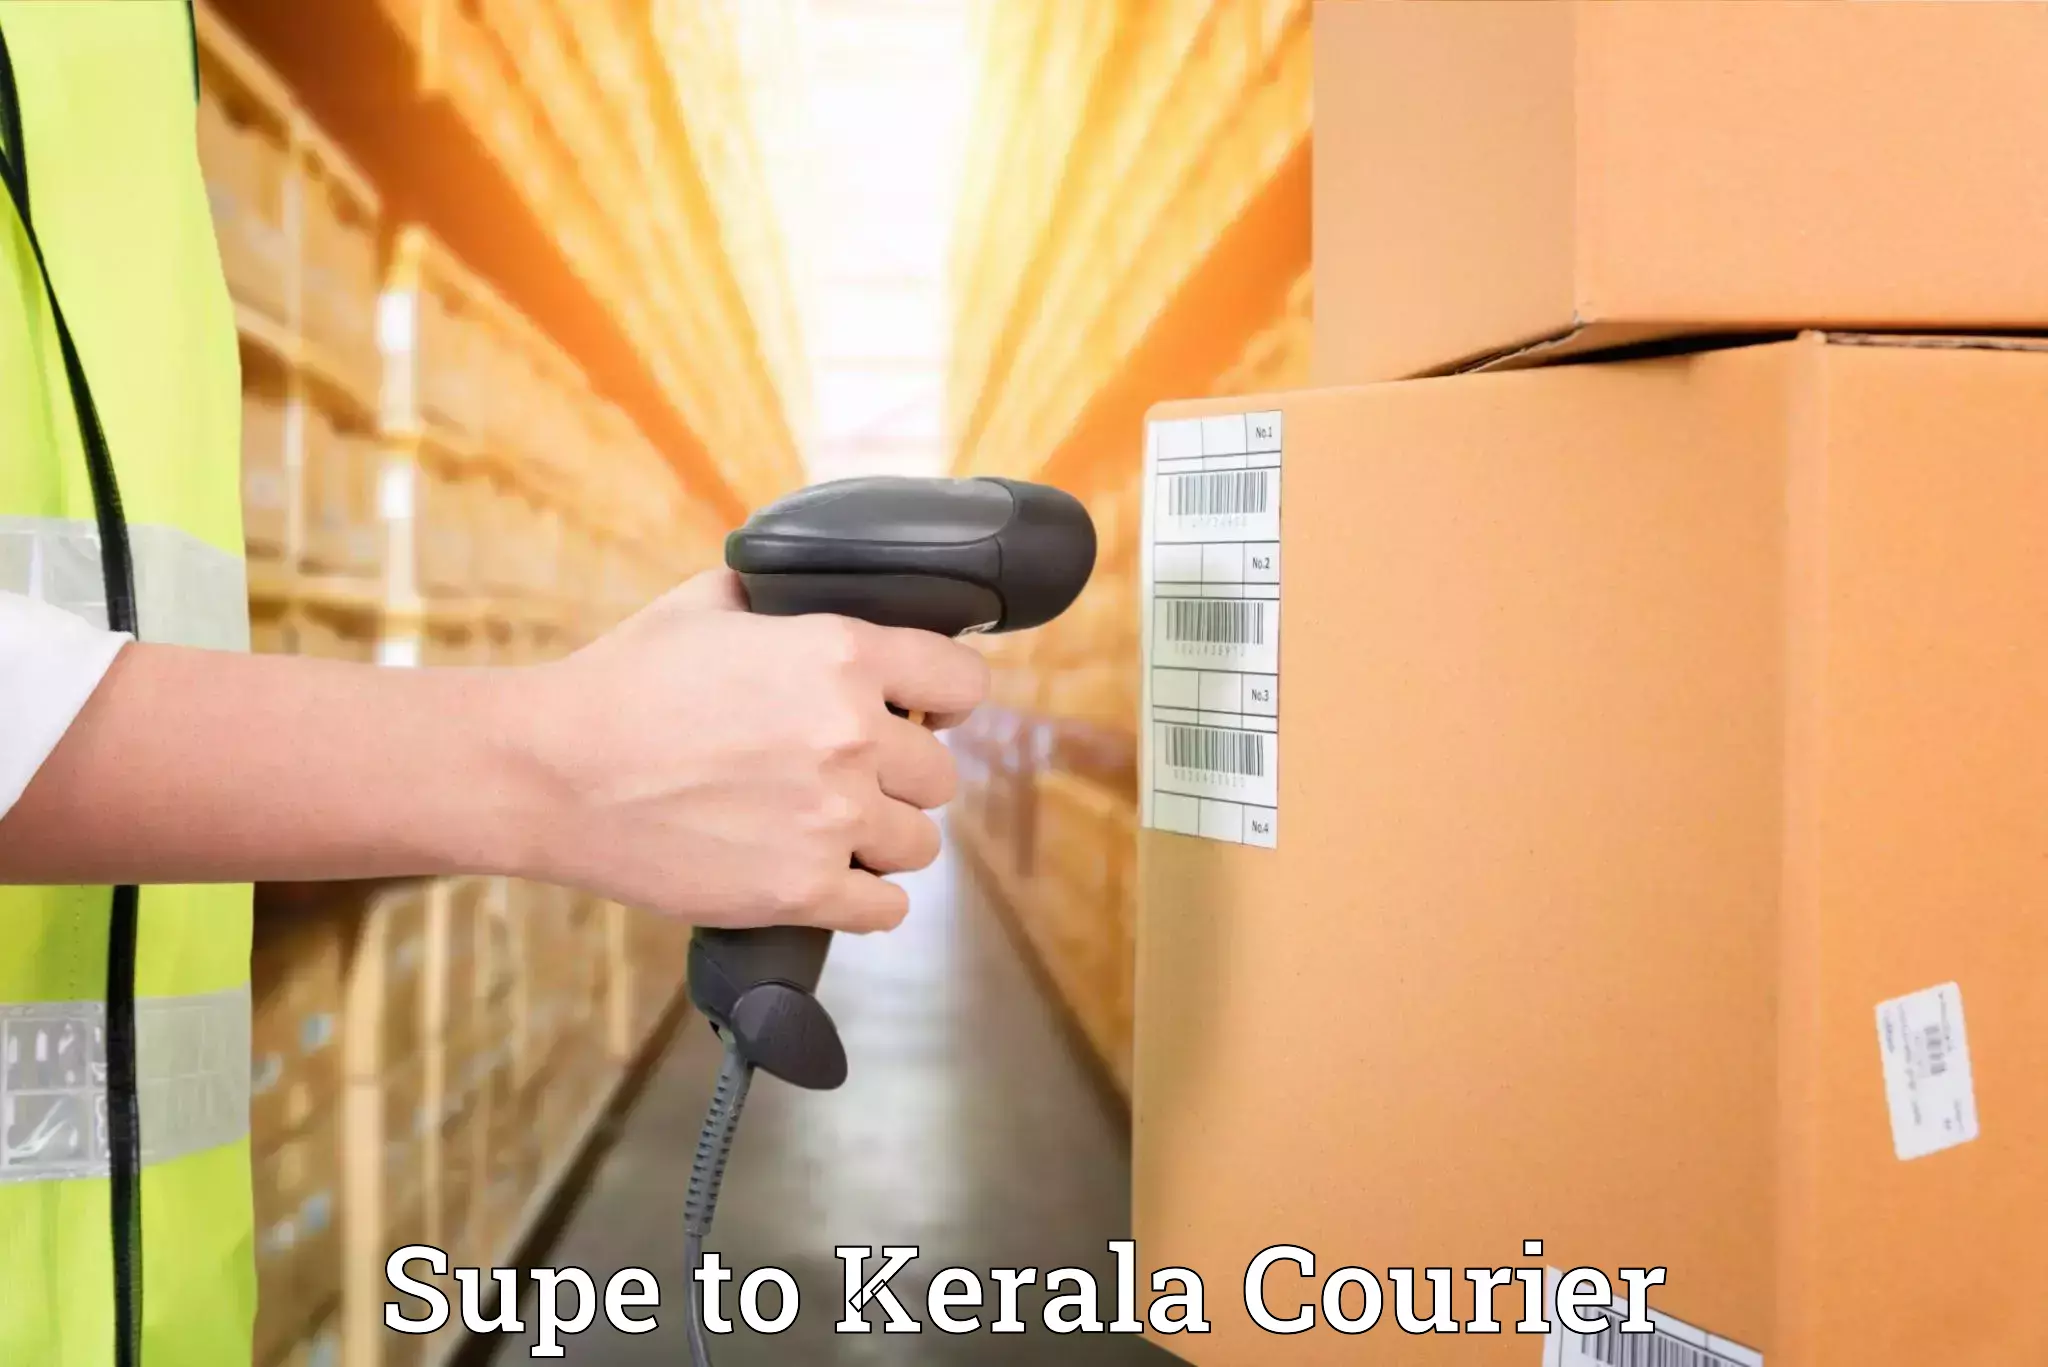 Specialized moving company Supe to Palai